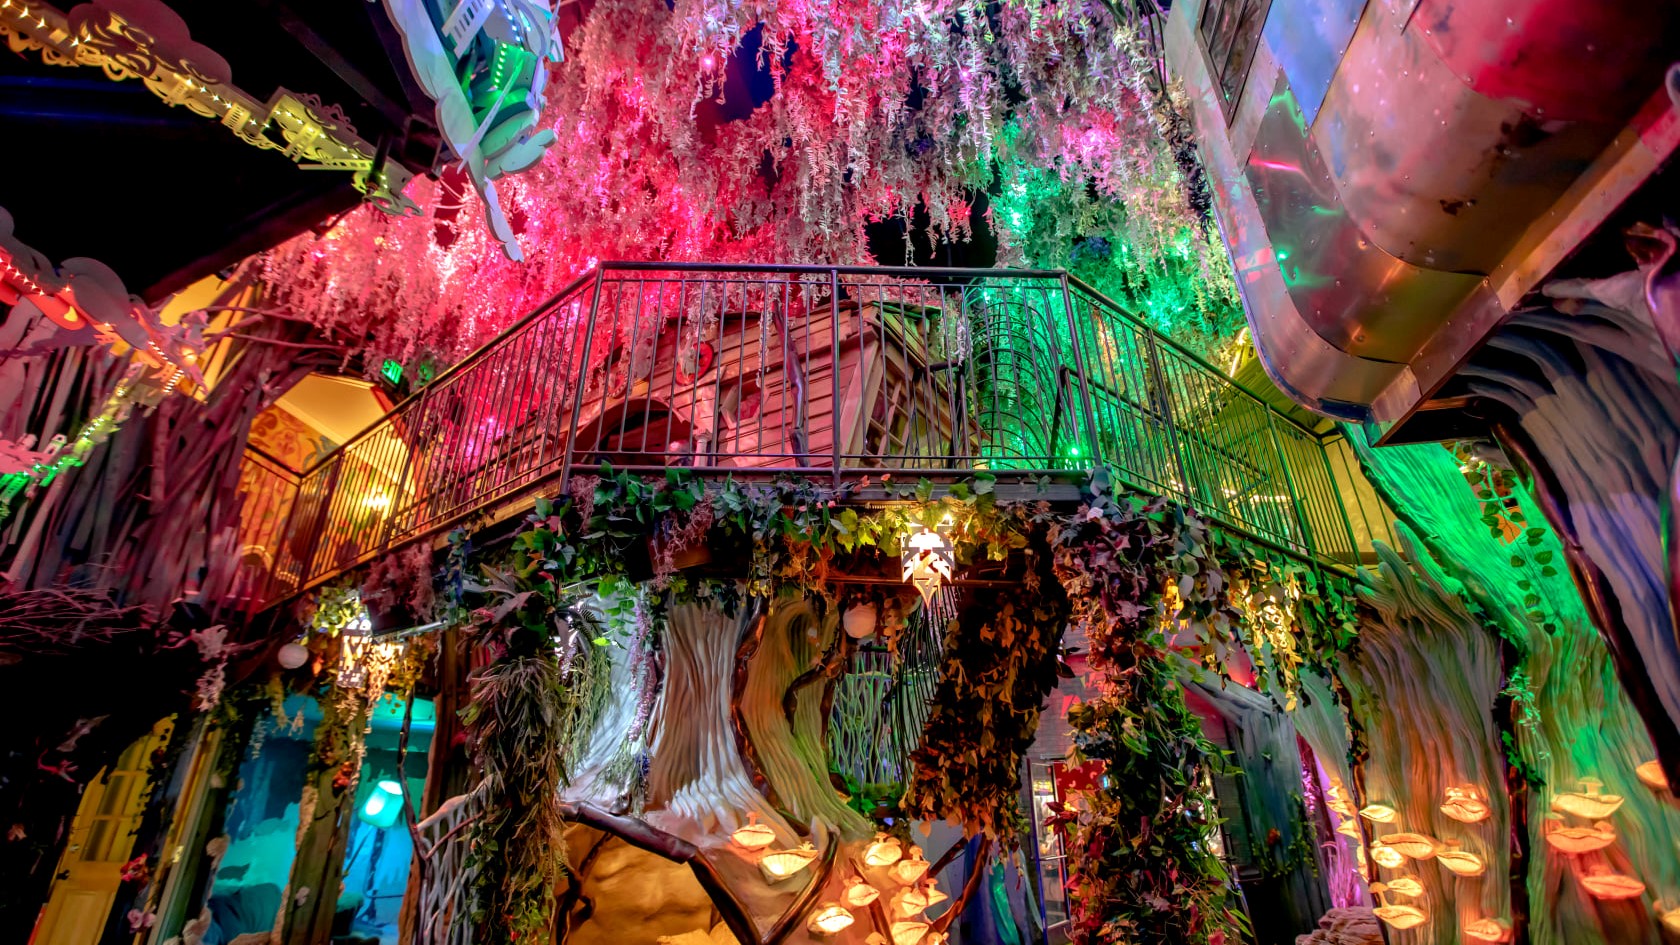 Passes to places like Meow Wolf, Main Event, Electric Playhouse and More!